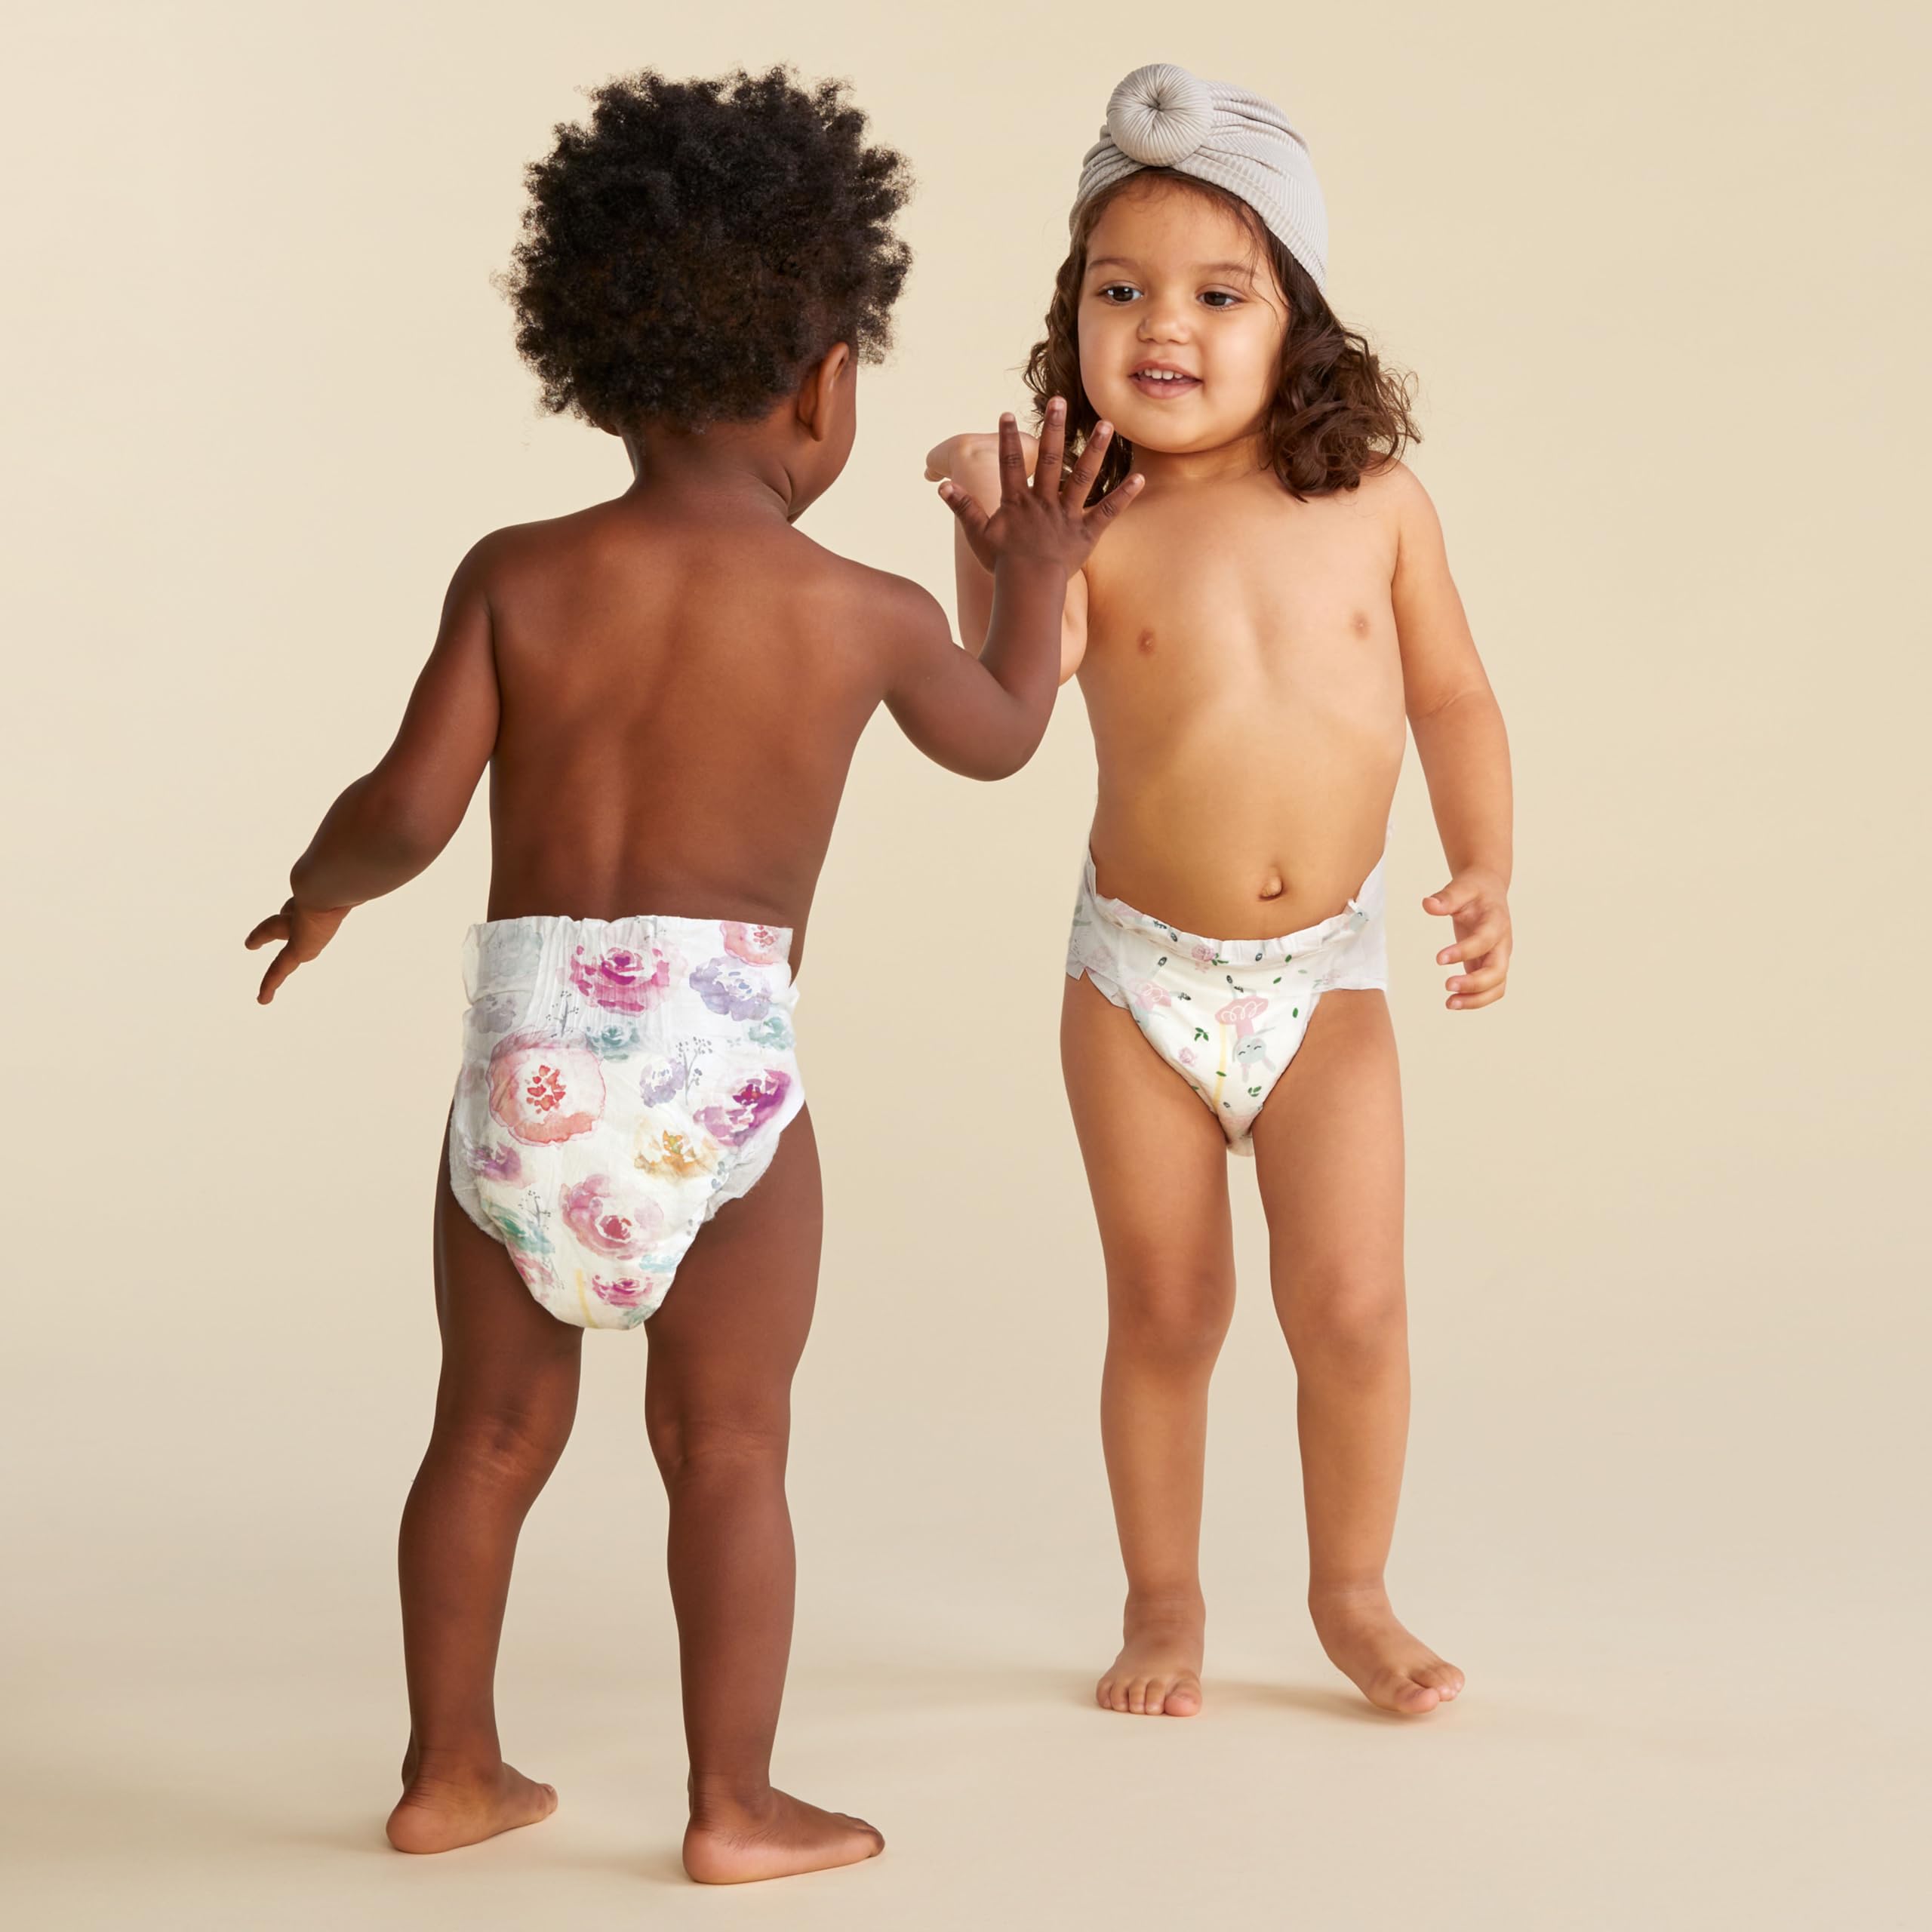 The Honest Company Clean Conscious Diapers | Plant-Based, Sustainable | Rose Blossom + Tutu Cute | Club Box, Size Newborn, 72 Count